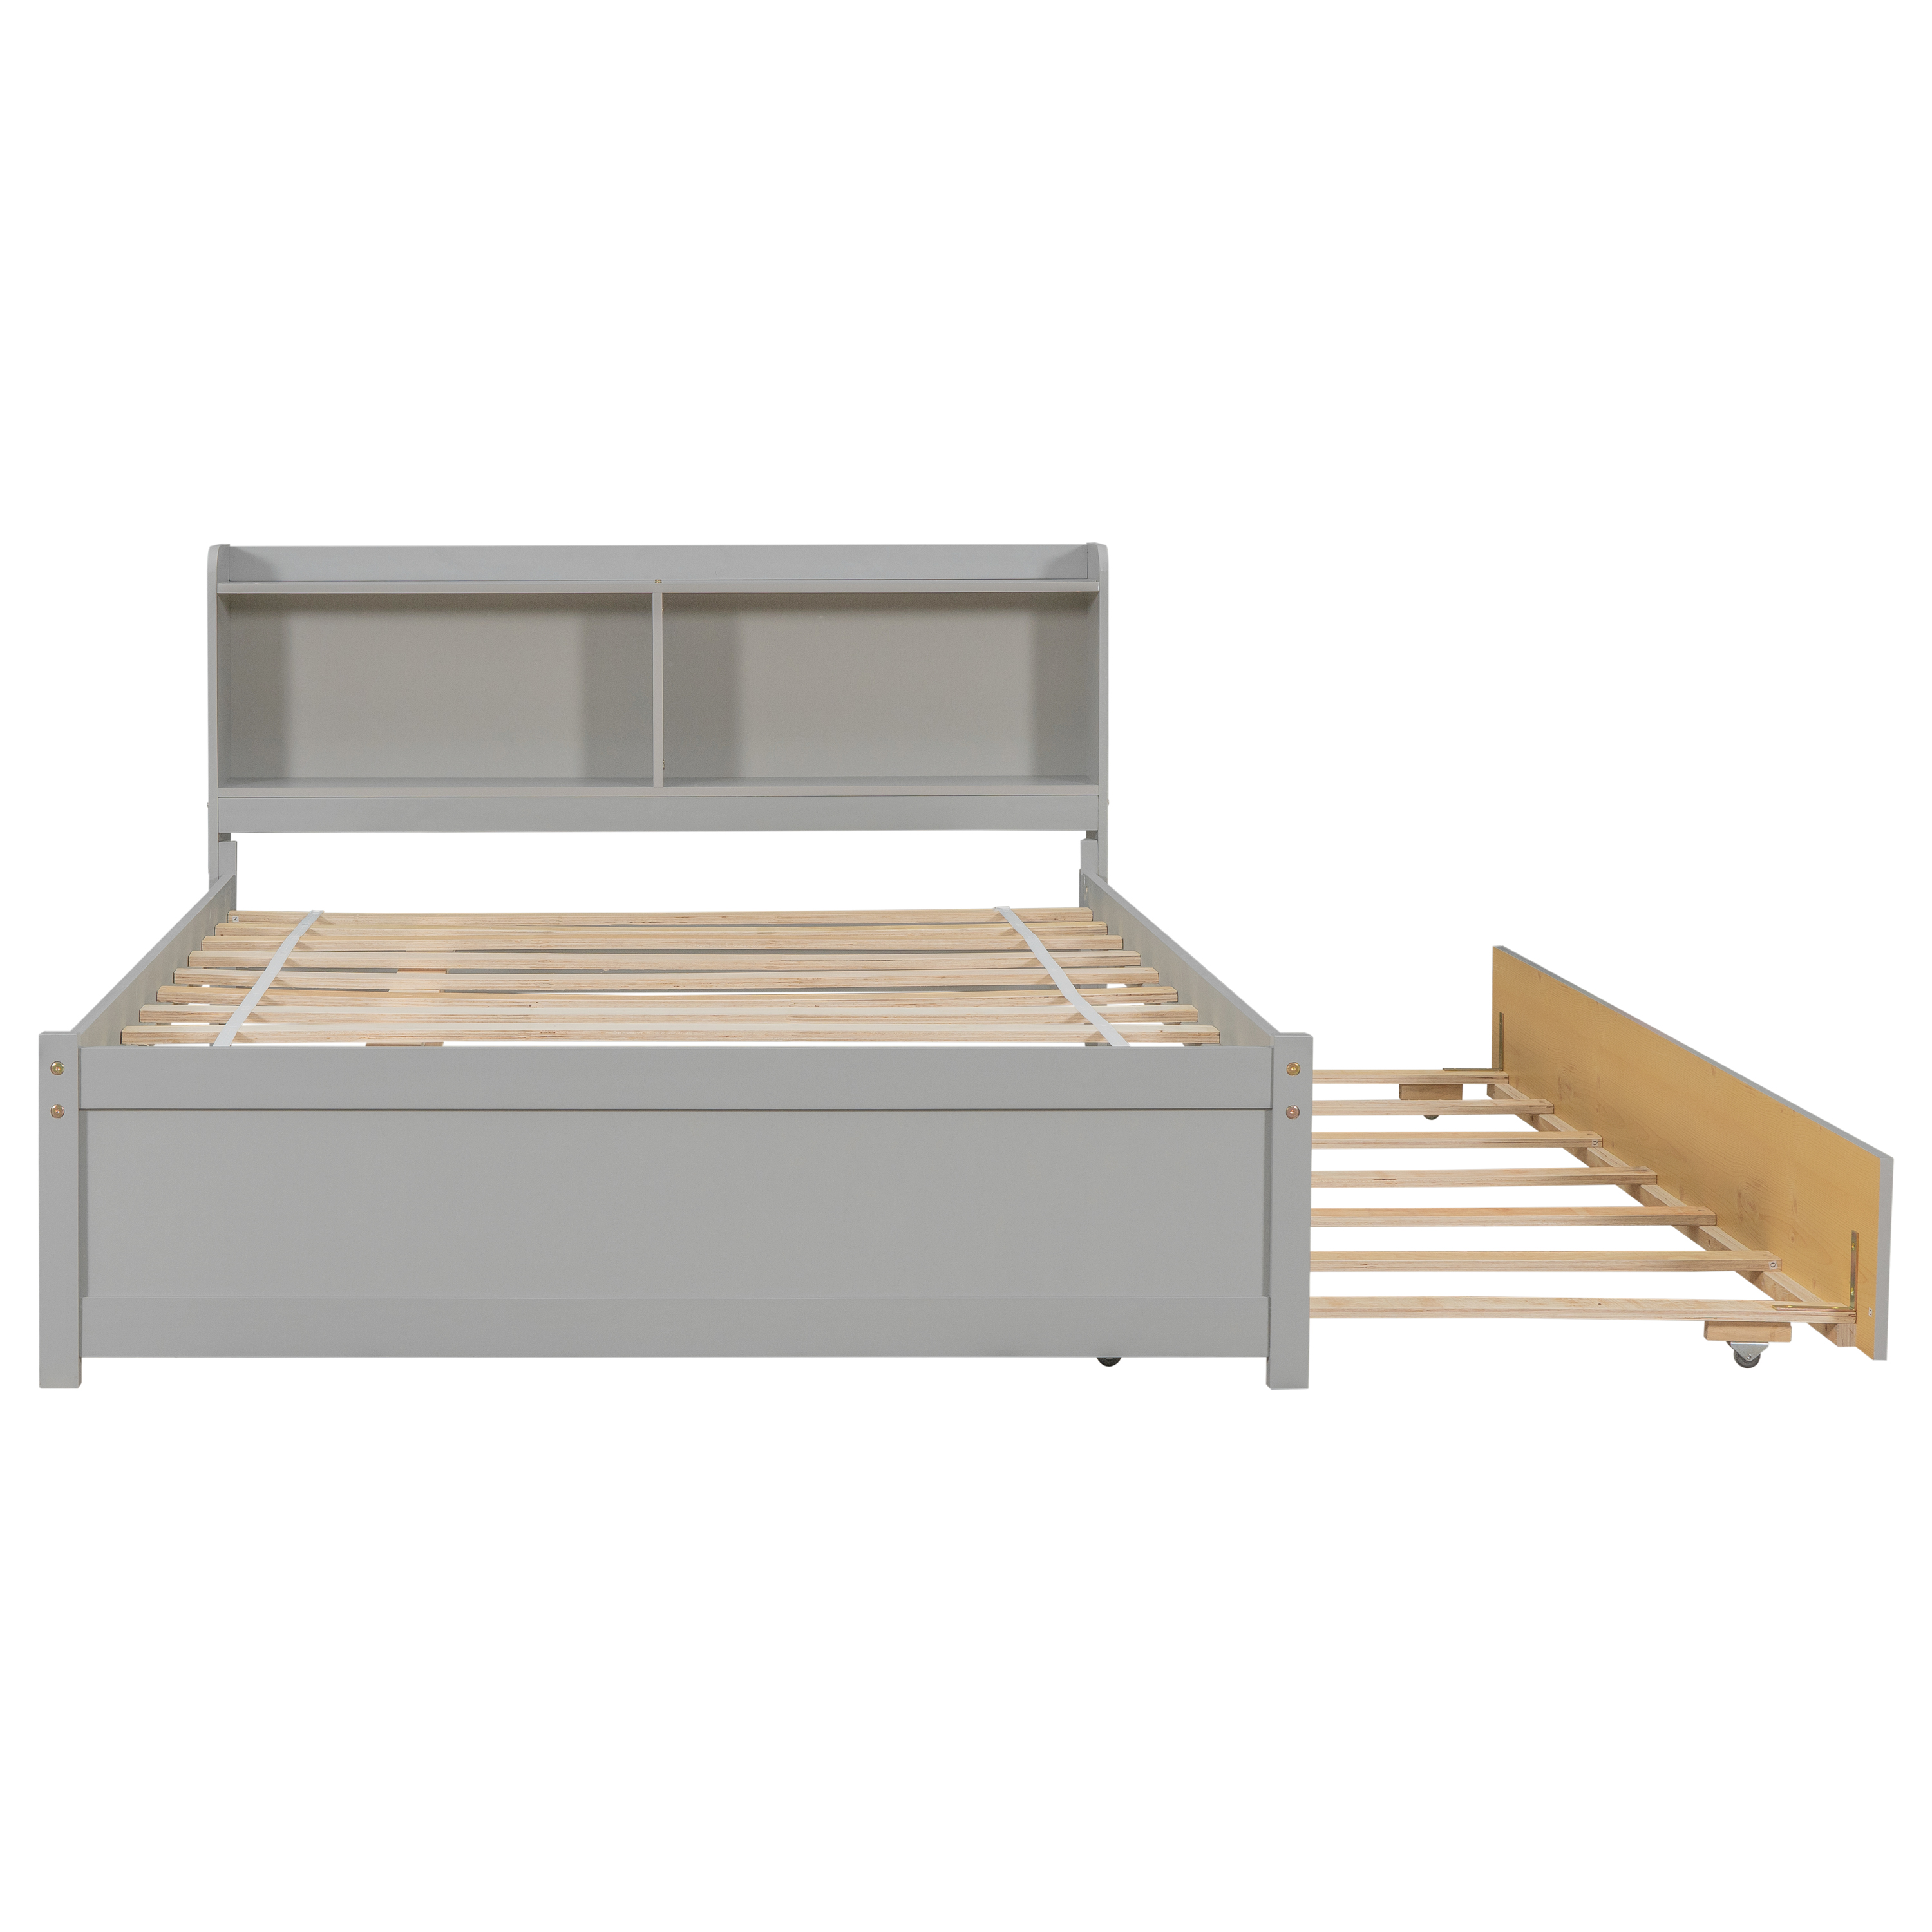 SYNGAR Gray Full Bed Frame with Trundle and Storage Bookcase, Kids Platform Full Size Bed with Pull Out Trundle, Solid Wood Trundle Bed with Headboard and Footboard, No Box Spring Needed - image 5 of 12